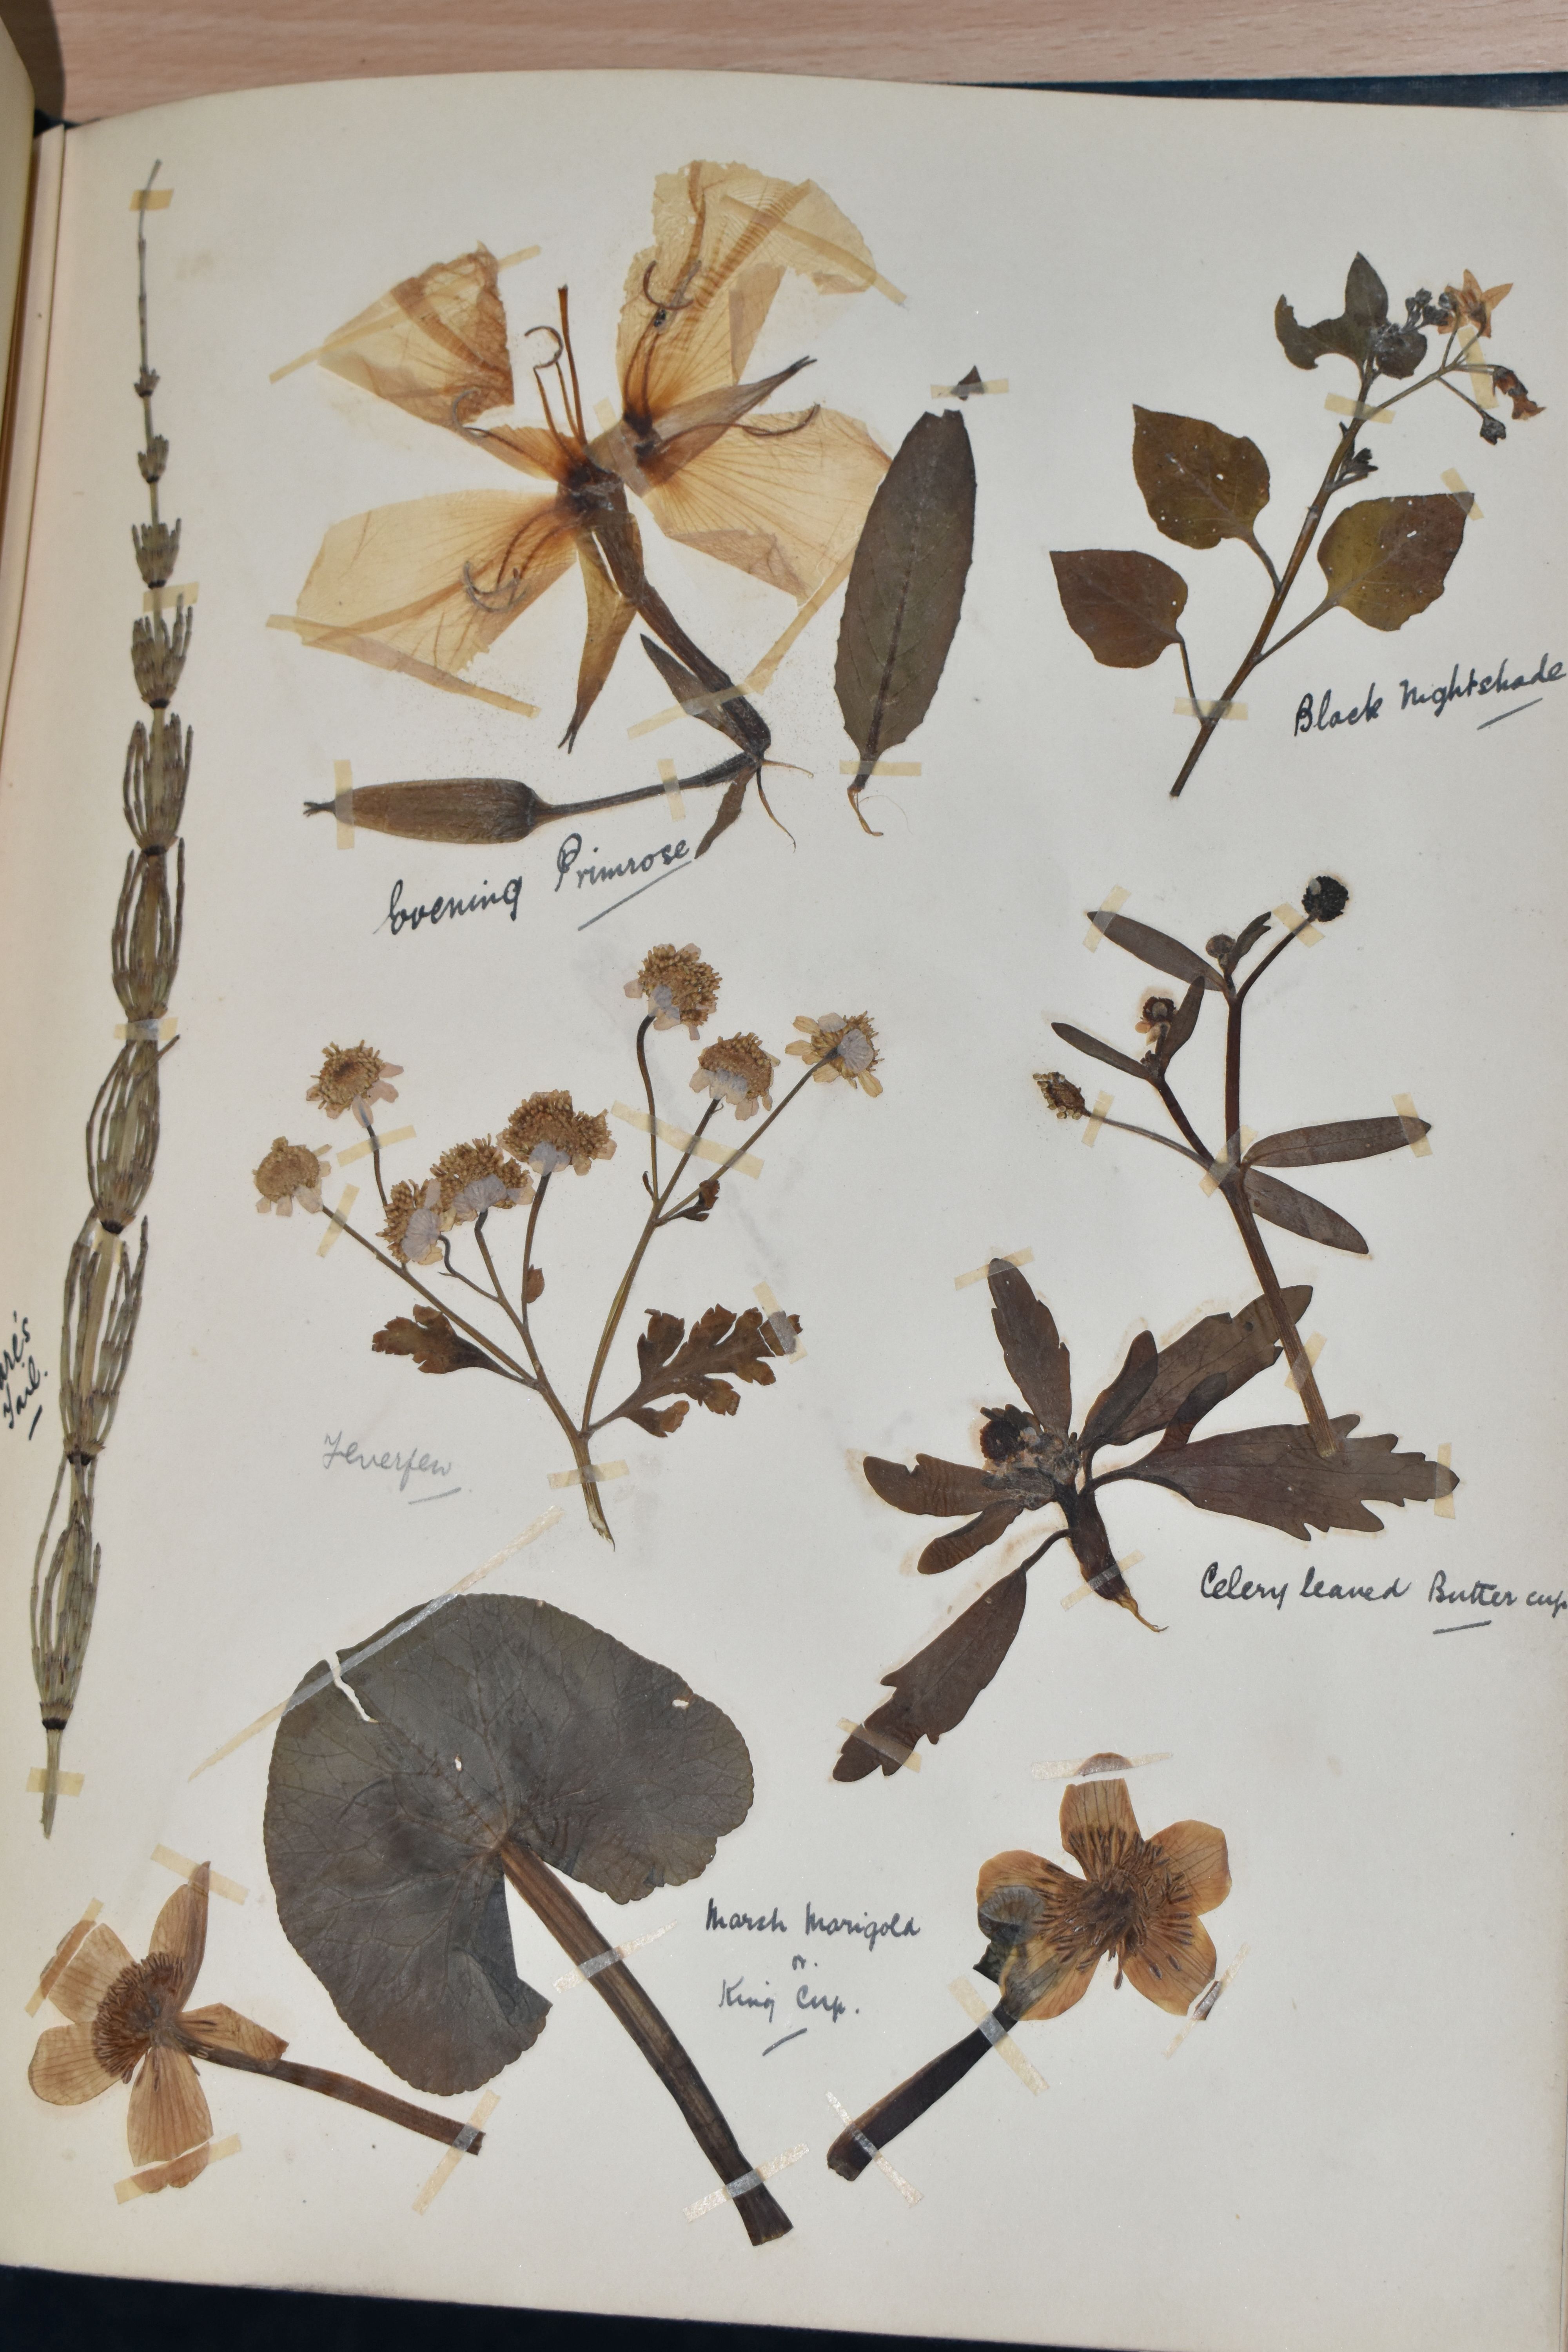 ONE BOOK OF PRESSED HERBS & PLANTS examples include Hop Trefoil, Daisy, Wild Thyme, Mallow, Wild - Image 16 of 16